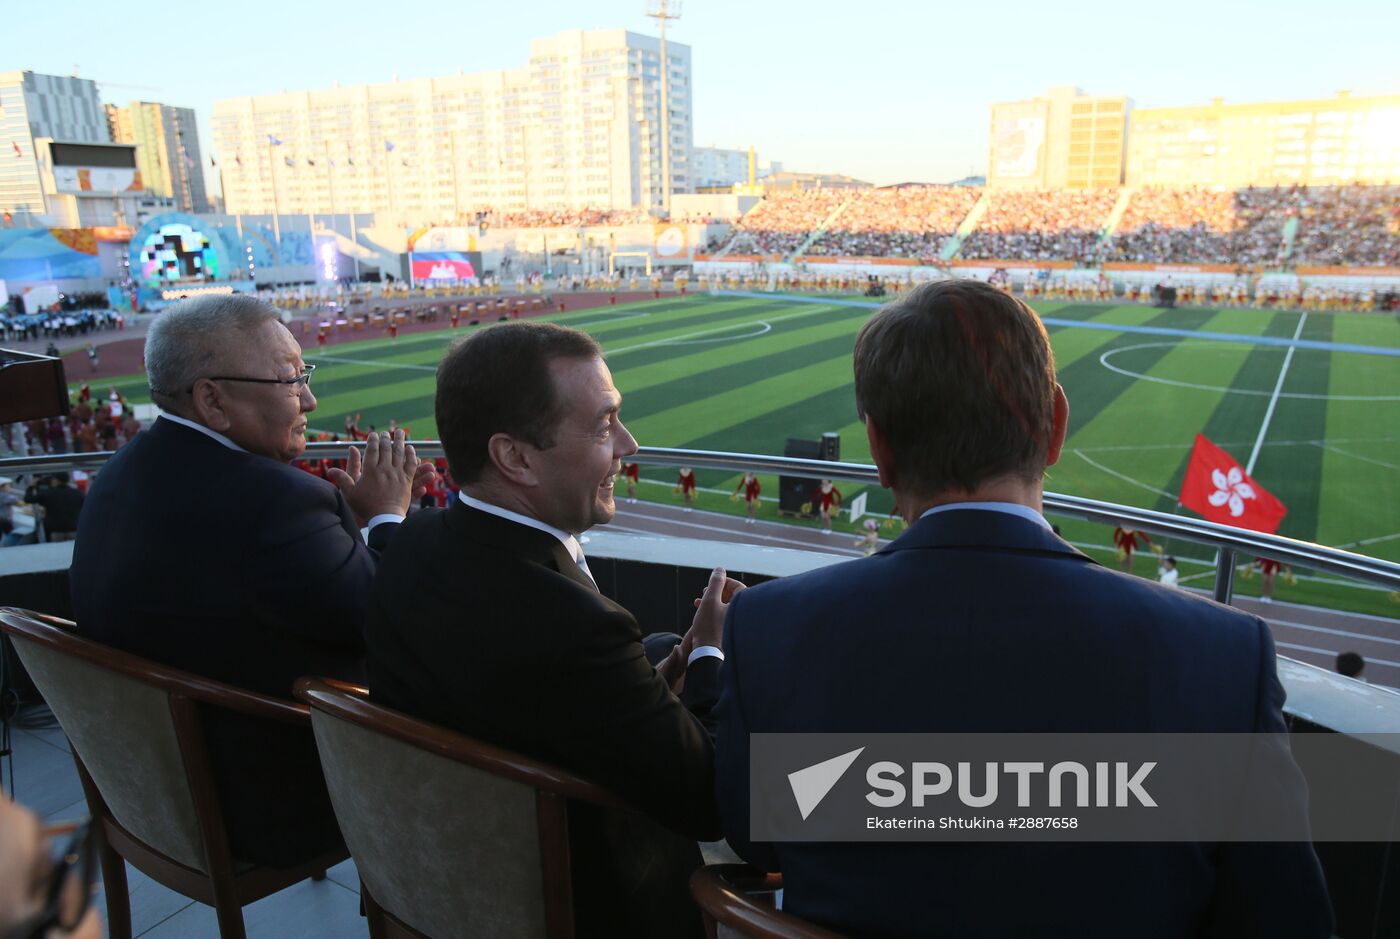 Prime Minister Dmitry Medvedev's working visit to Far Eastern Federal District